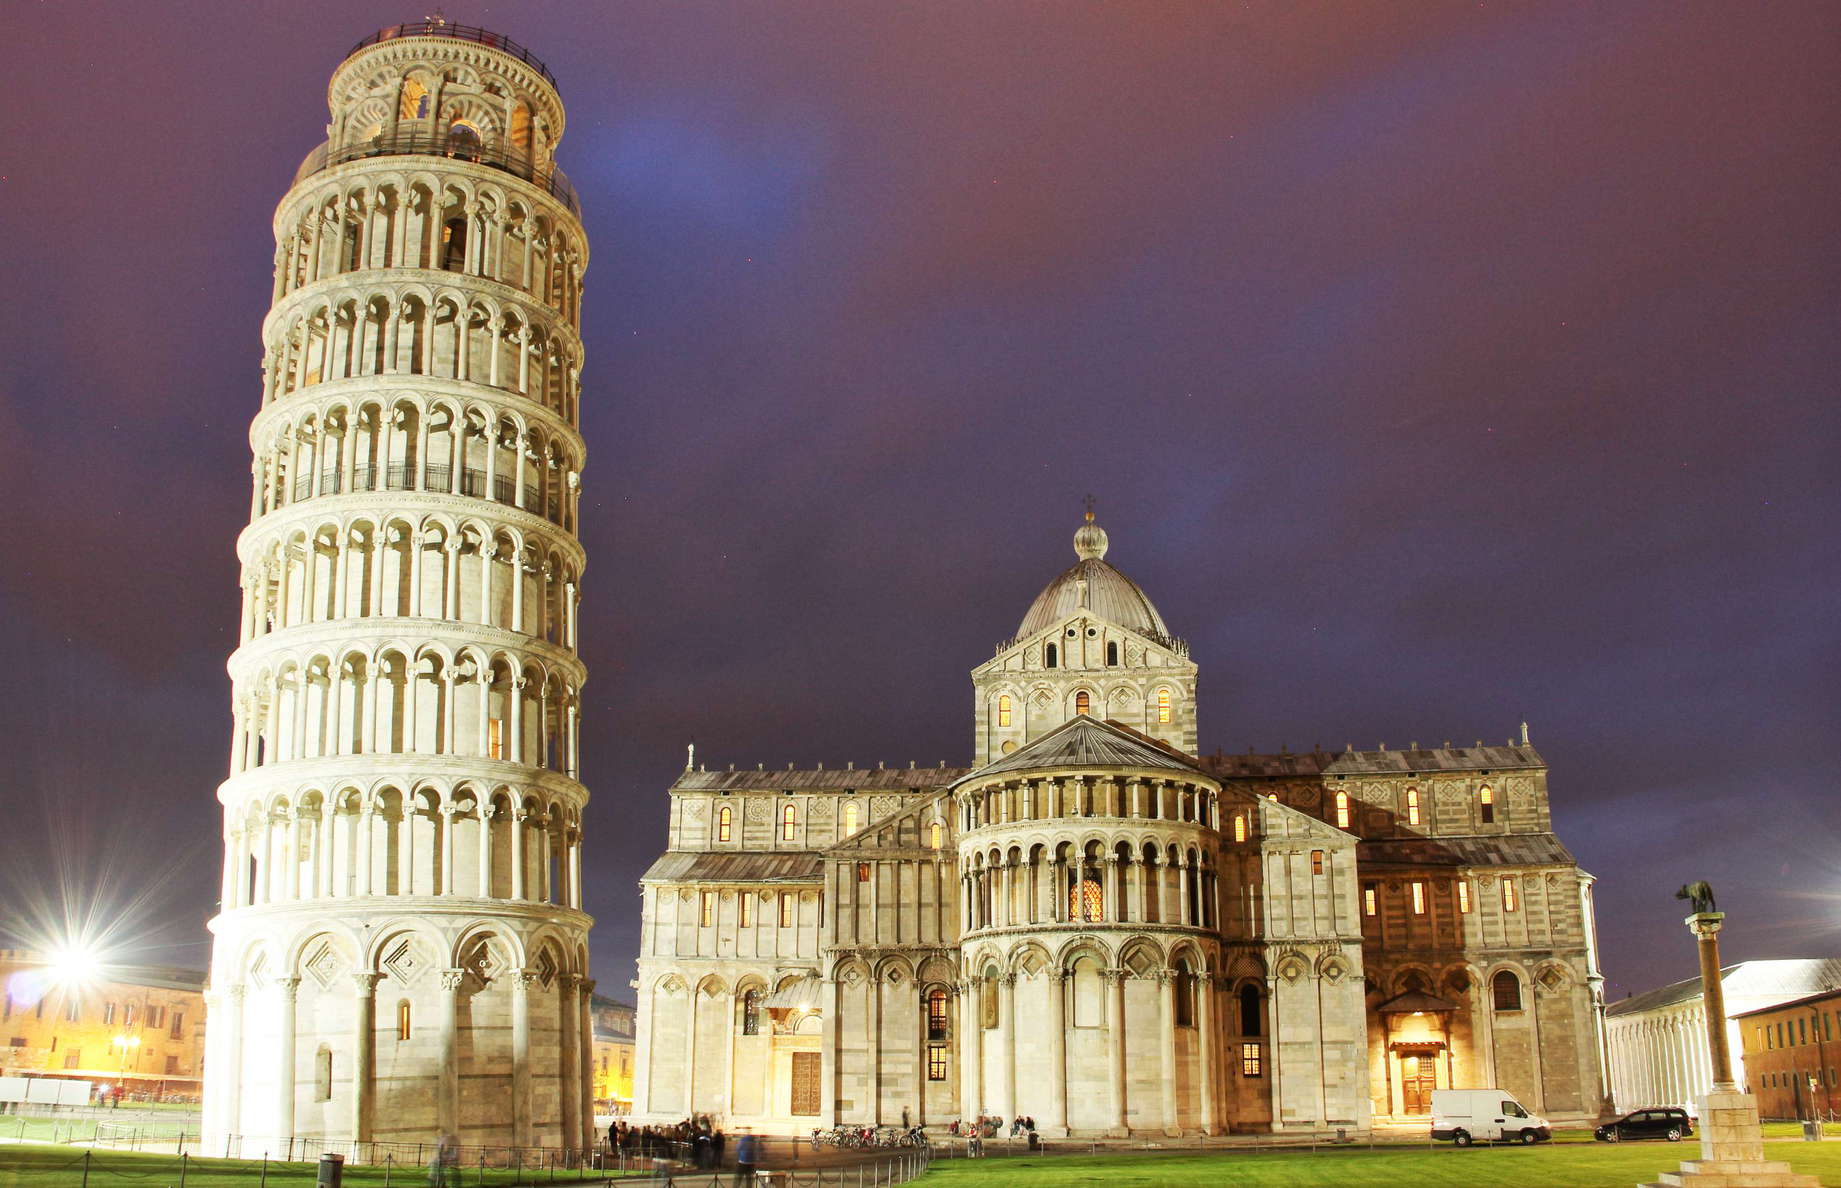 leaning tower of pisa at night